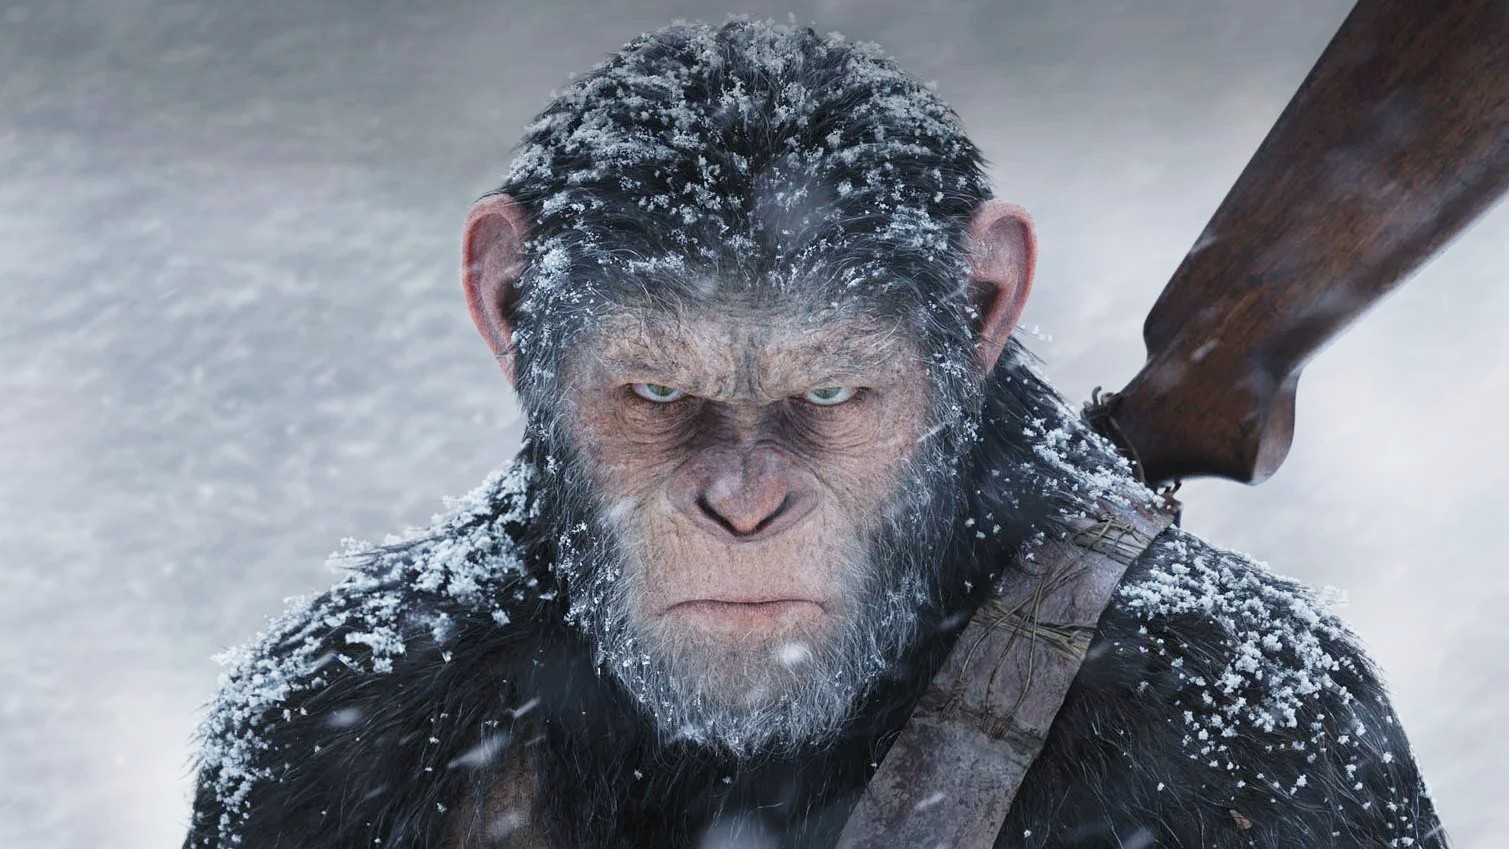 of The Apes finds new lead in The Stand actor Owen Teague who